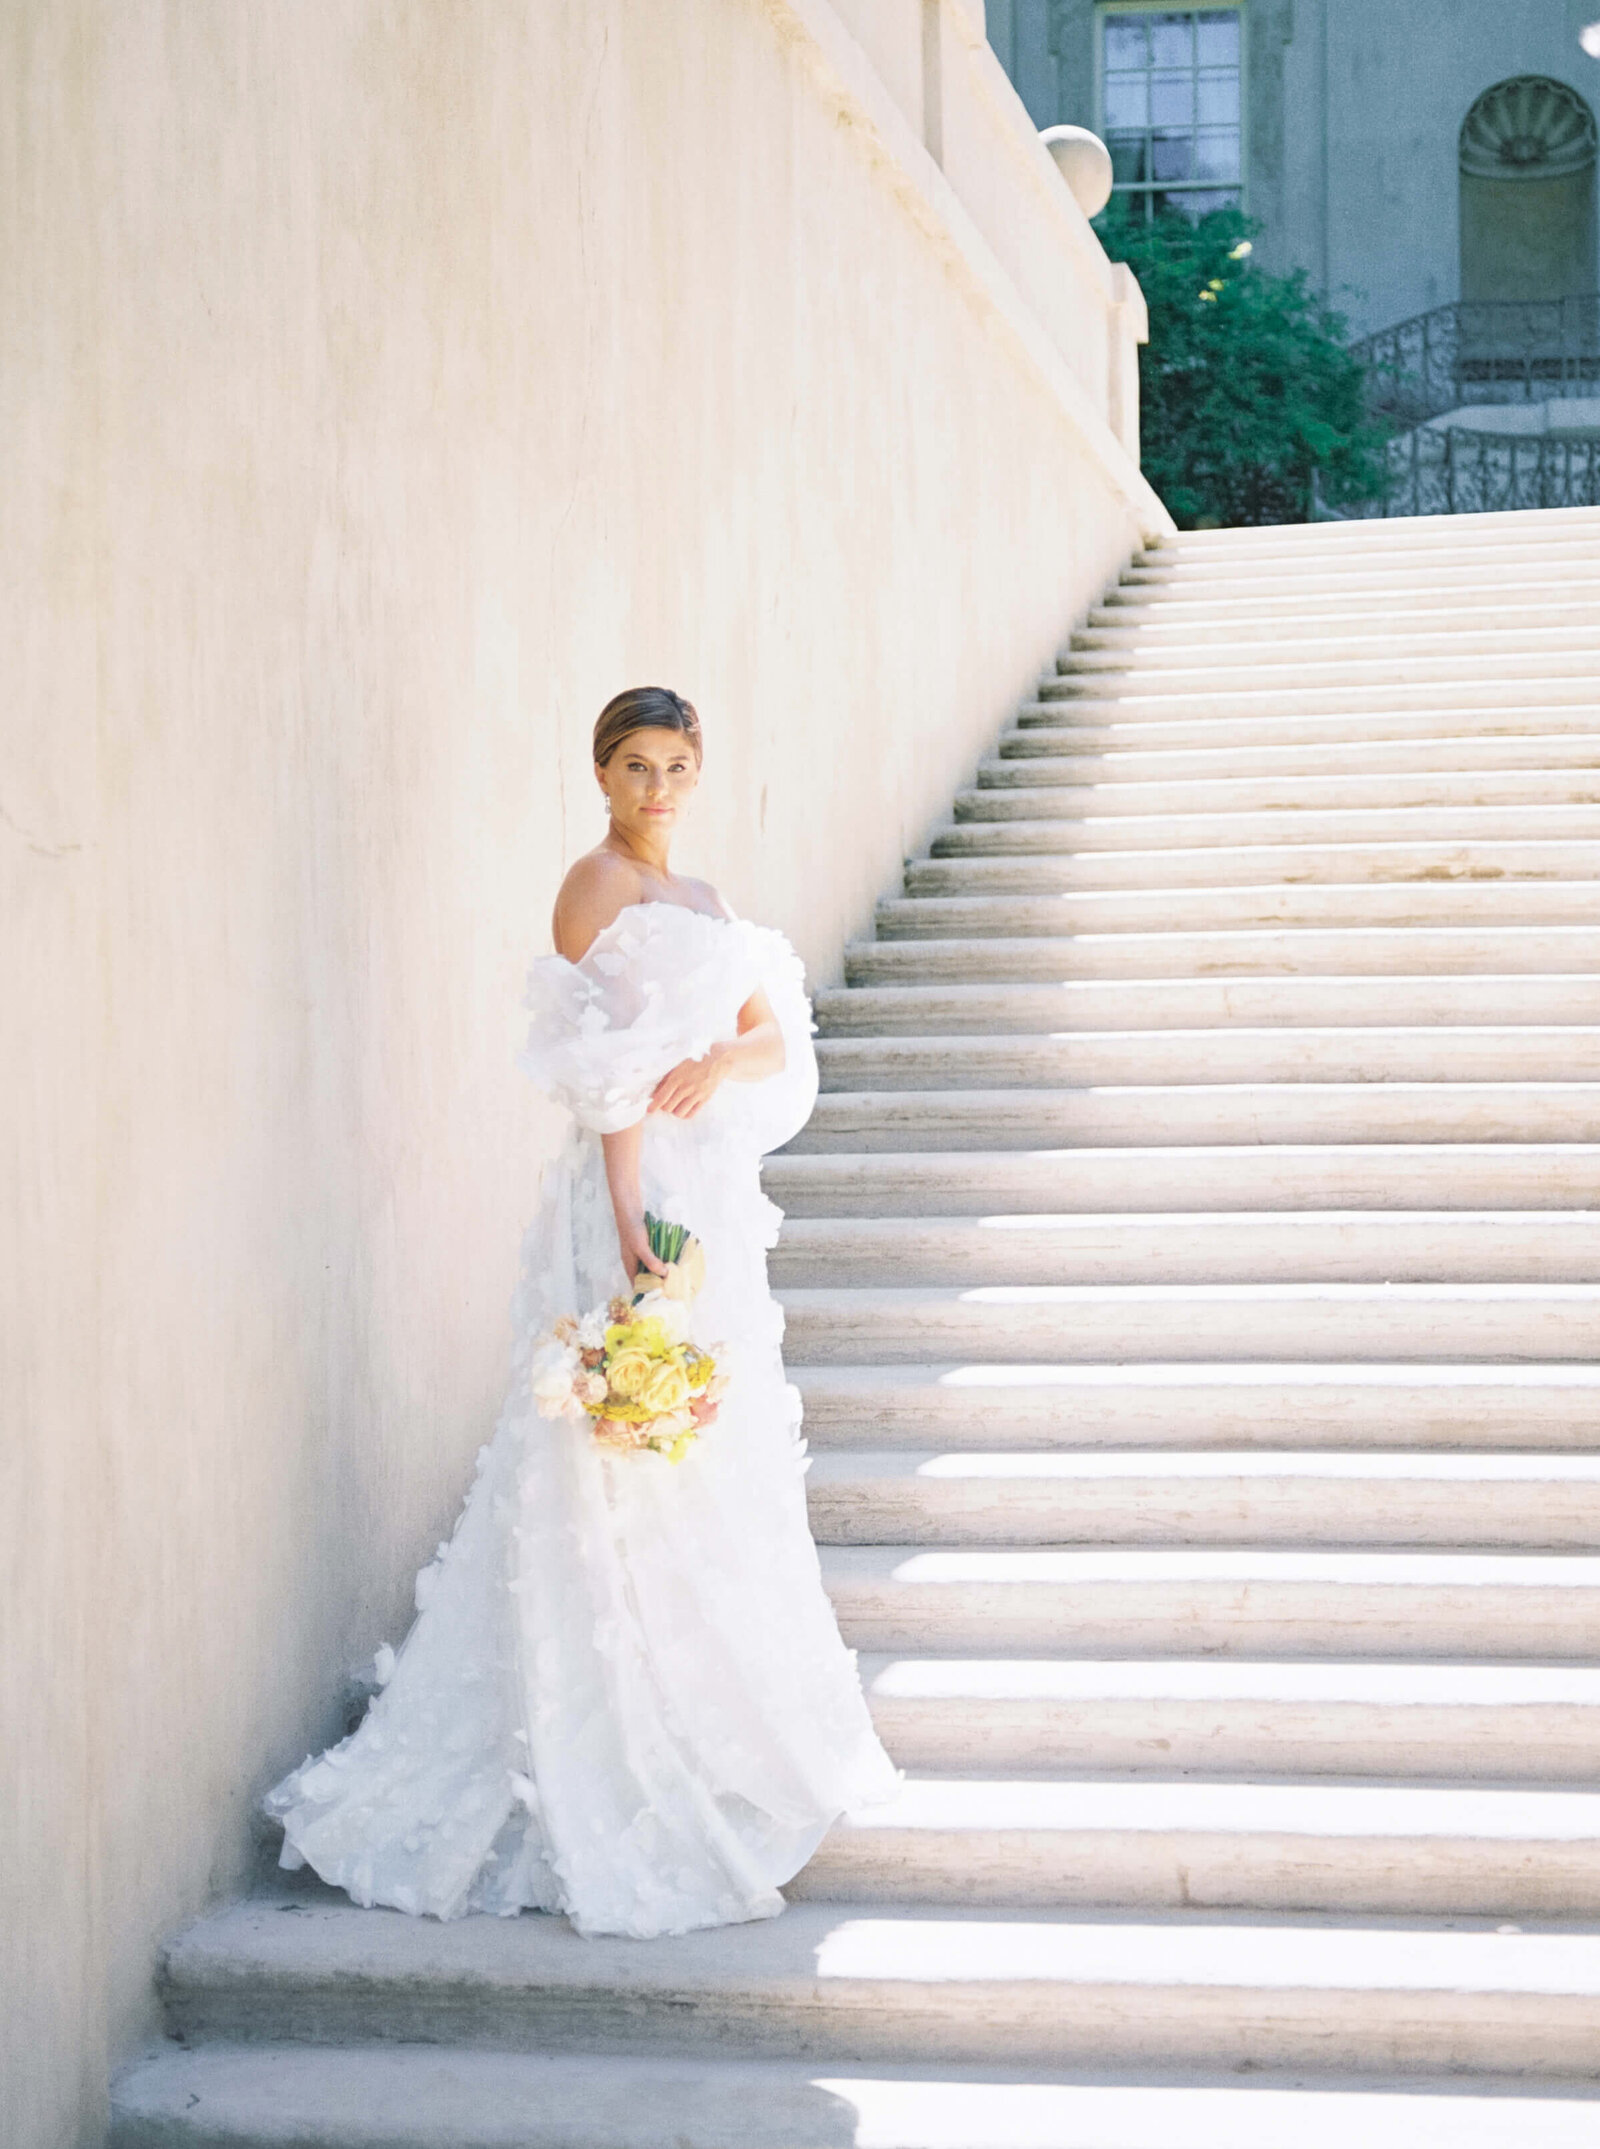 Bride stands on white stone stairs in designer wedding dress while holding yellow bouquet